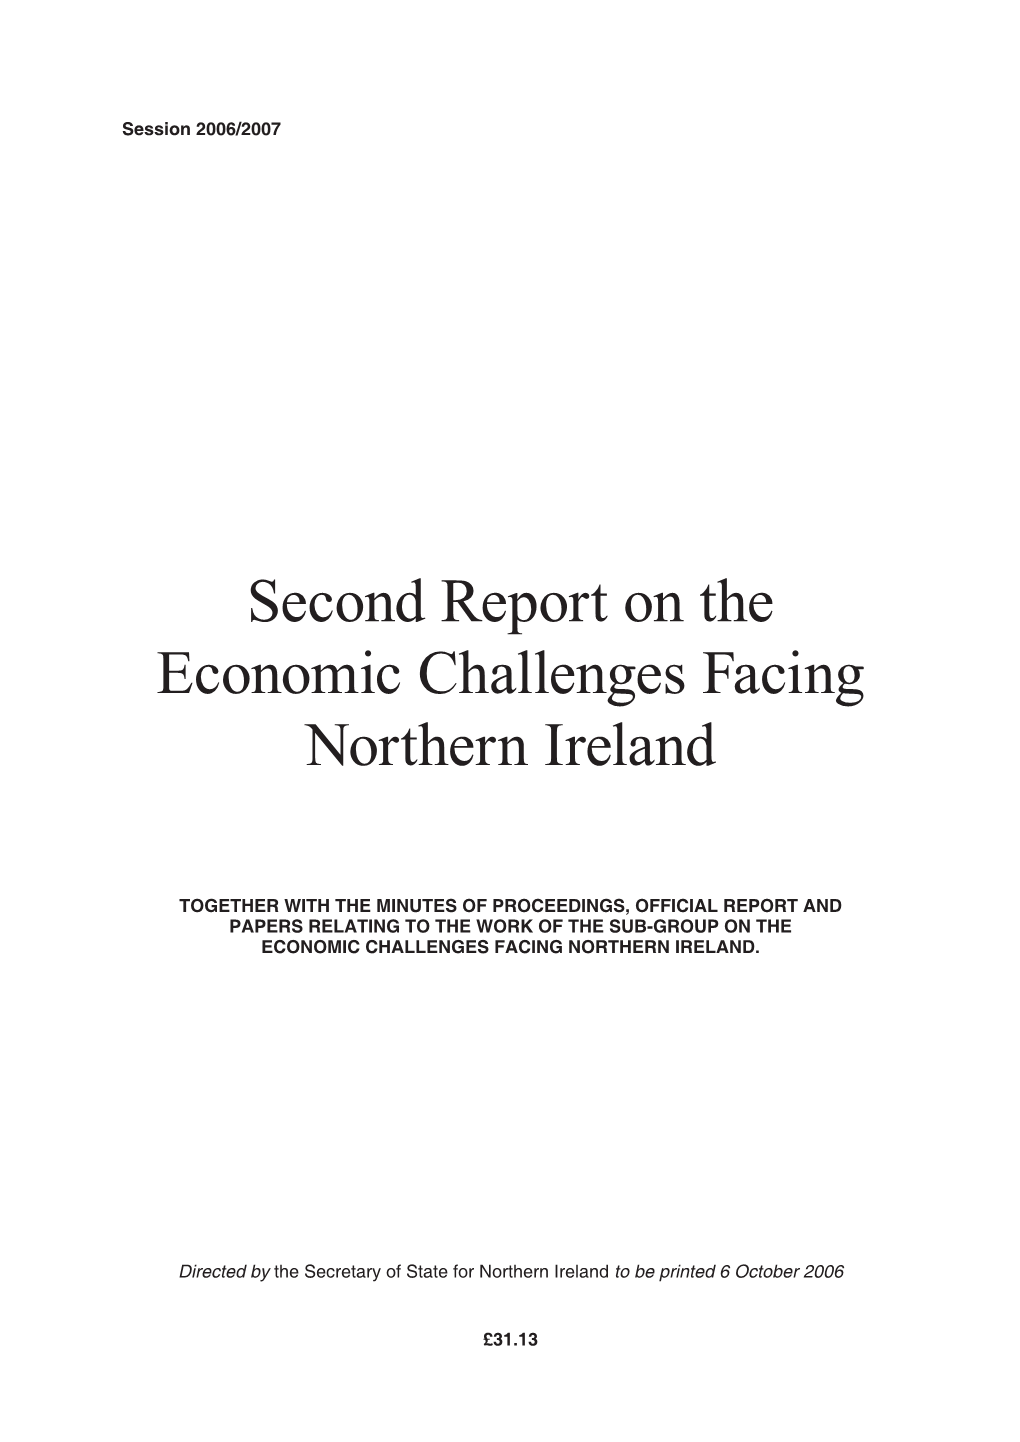 Second Report on the Economic Challenges Facing Northern Ireland